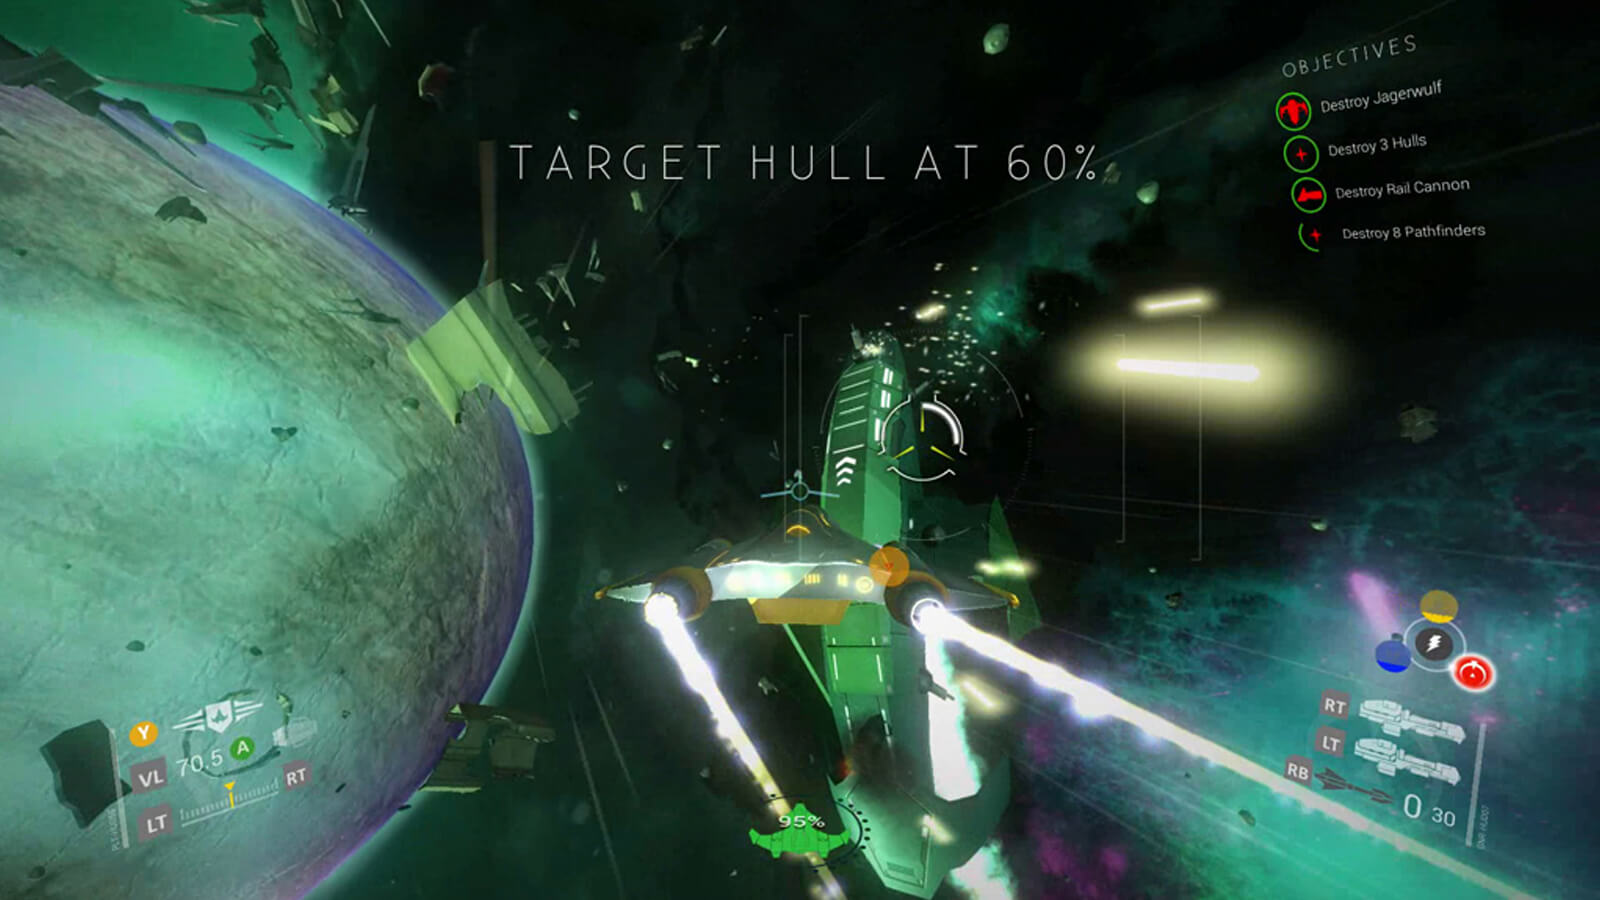 The player's spacecraft is seen from the rear as its engines leave exhaust behind it. A green enemy ship is seen ahead of it.